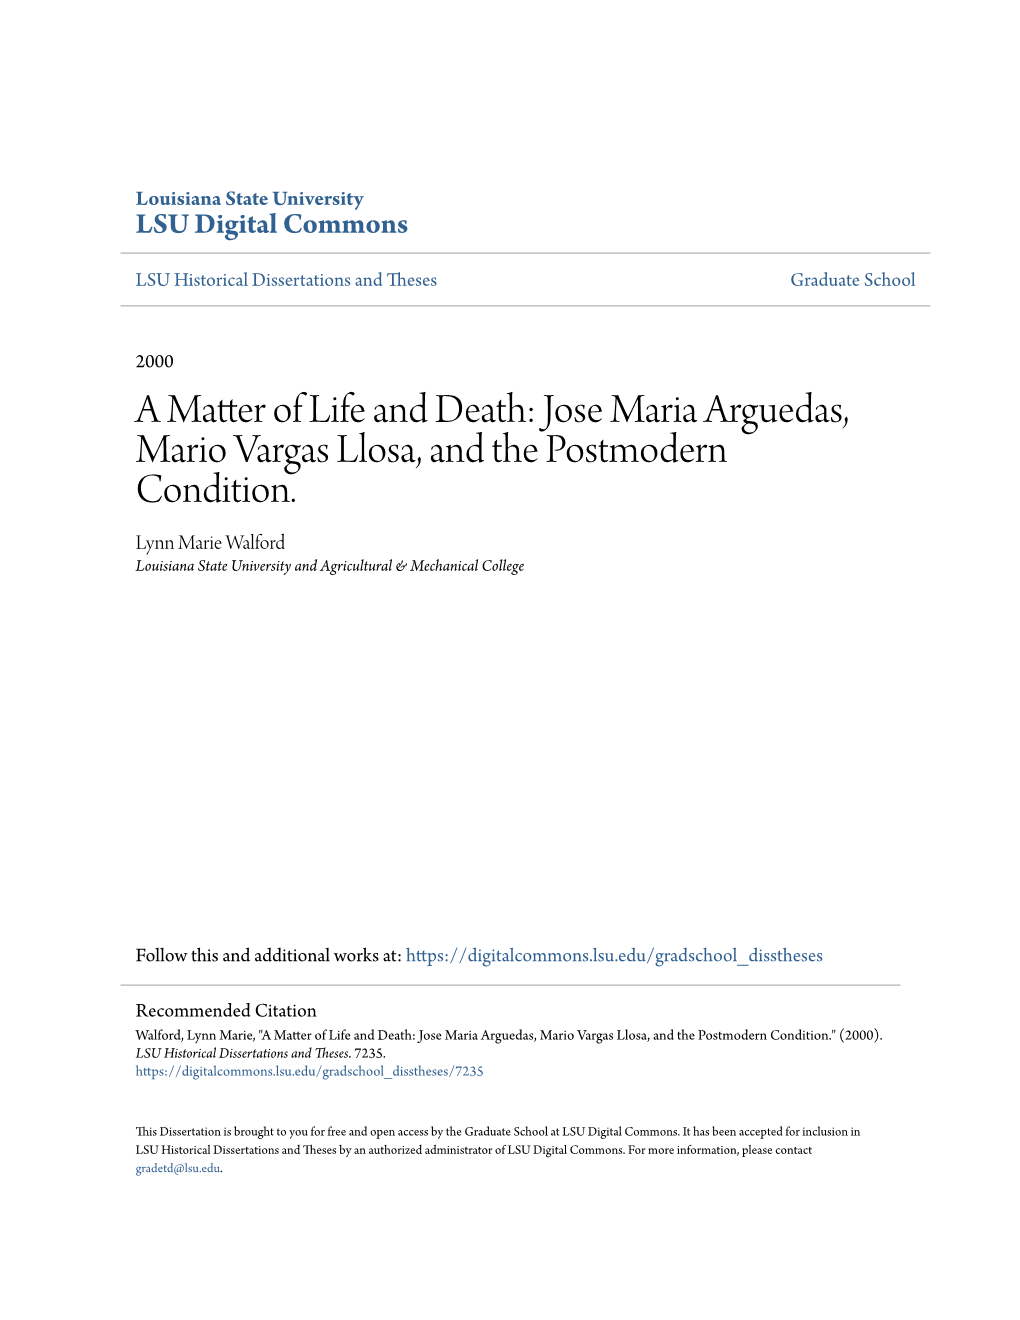 A Matter of Life and Death: Jose Maria Arguedas, Mario Vargas Llosa, and the Postmodern Condition